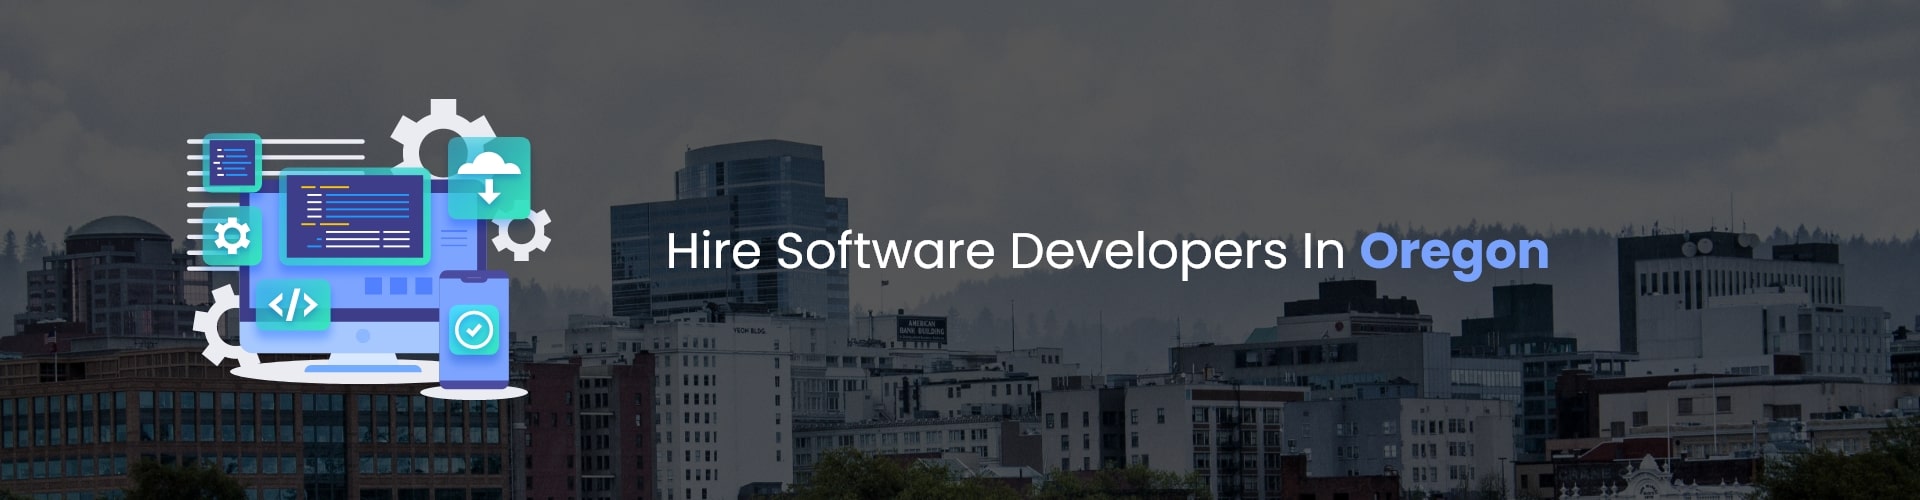 hire software developers in oregon